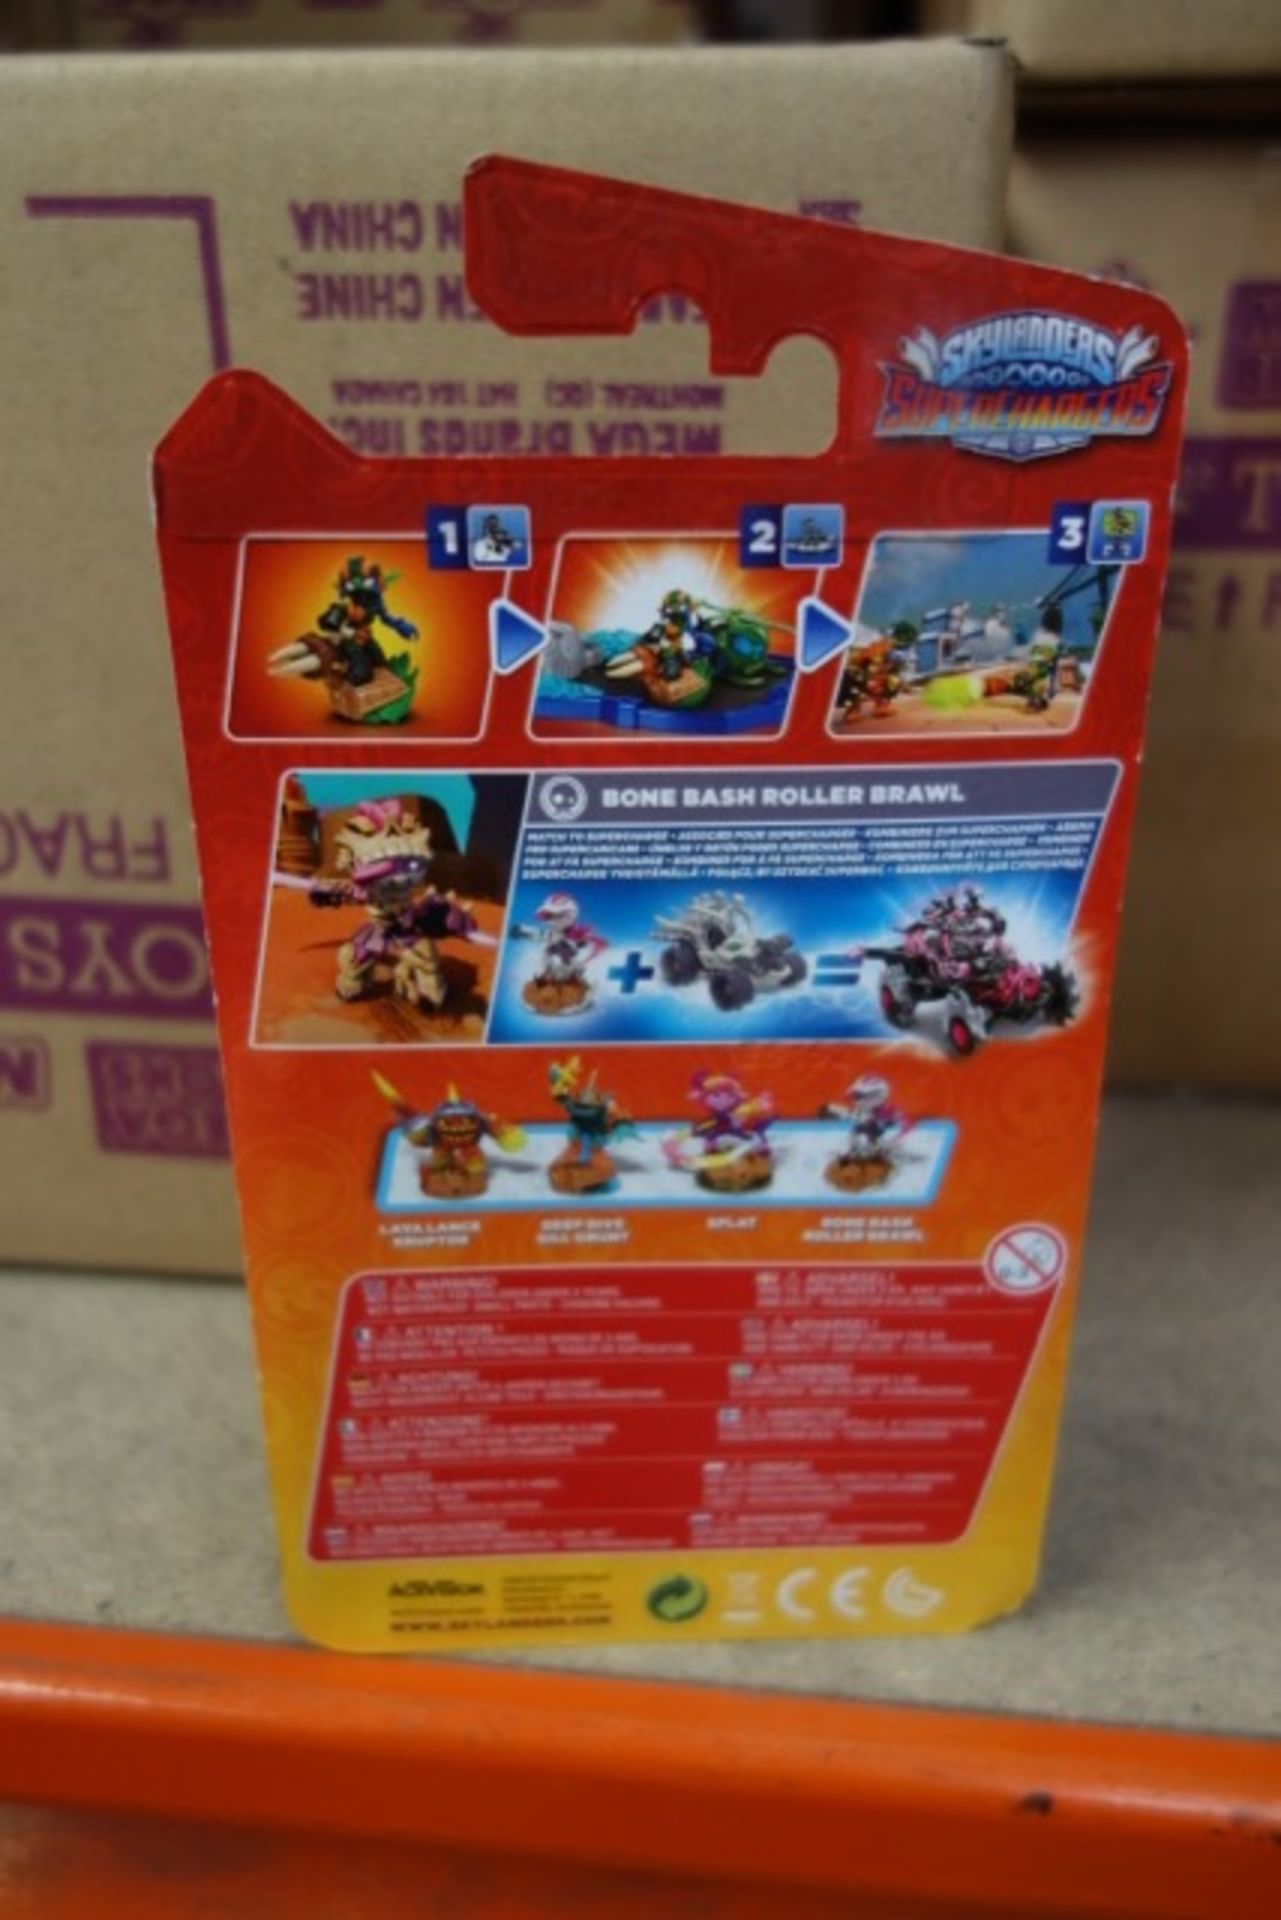 24 x Skylanders Superchargers Bone Bash Roller Brawl Figures. RRP £14.99 each, giving this lot a - Image 2 of 2